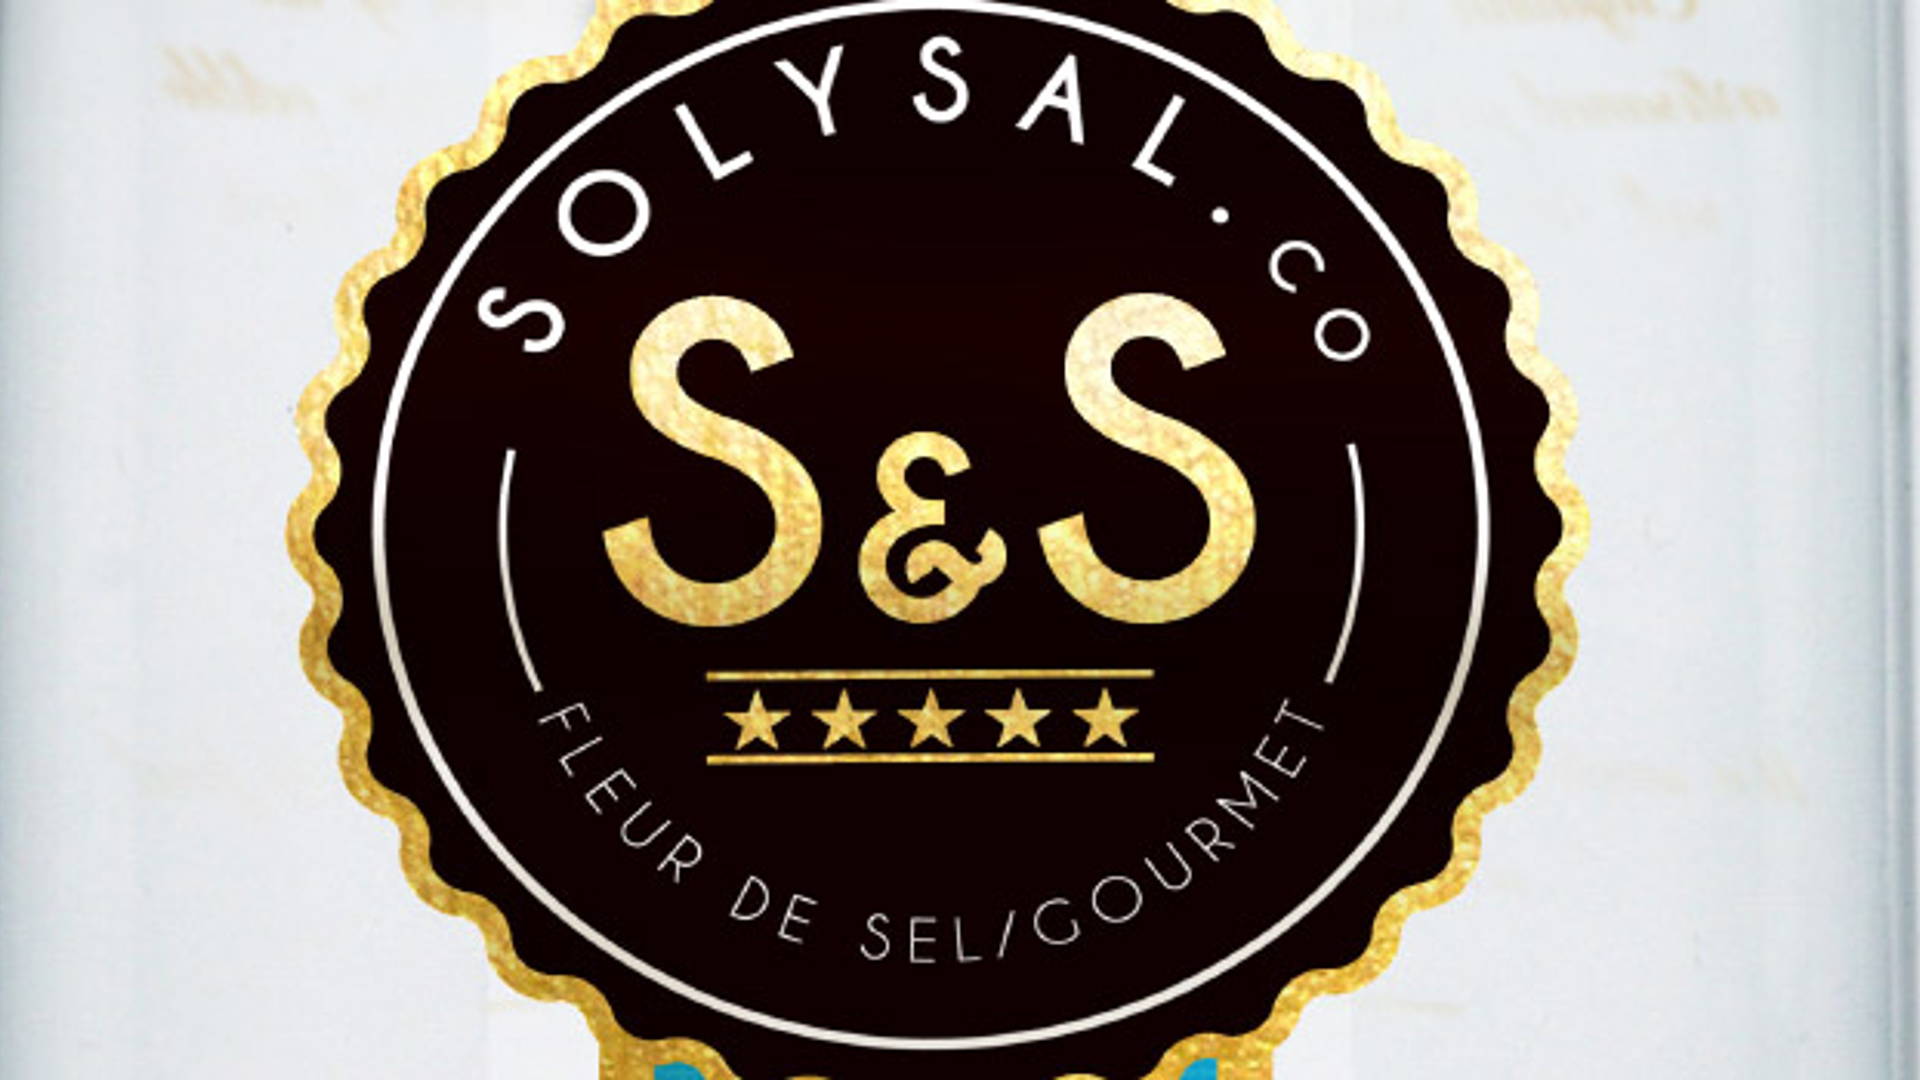 Featured image for Solysal Limited Edition Gourmet Salt